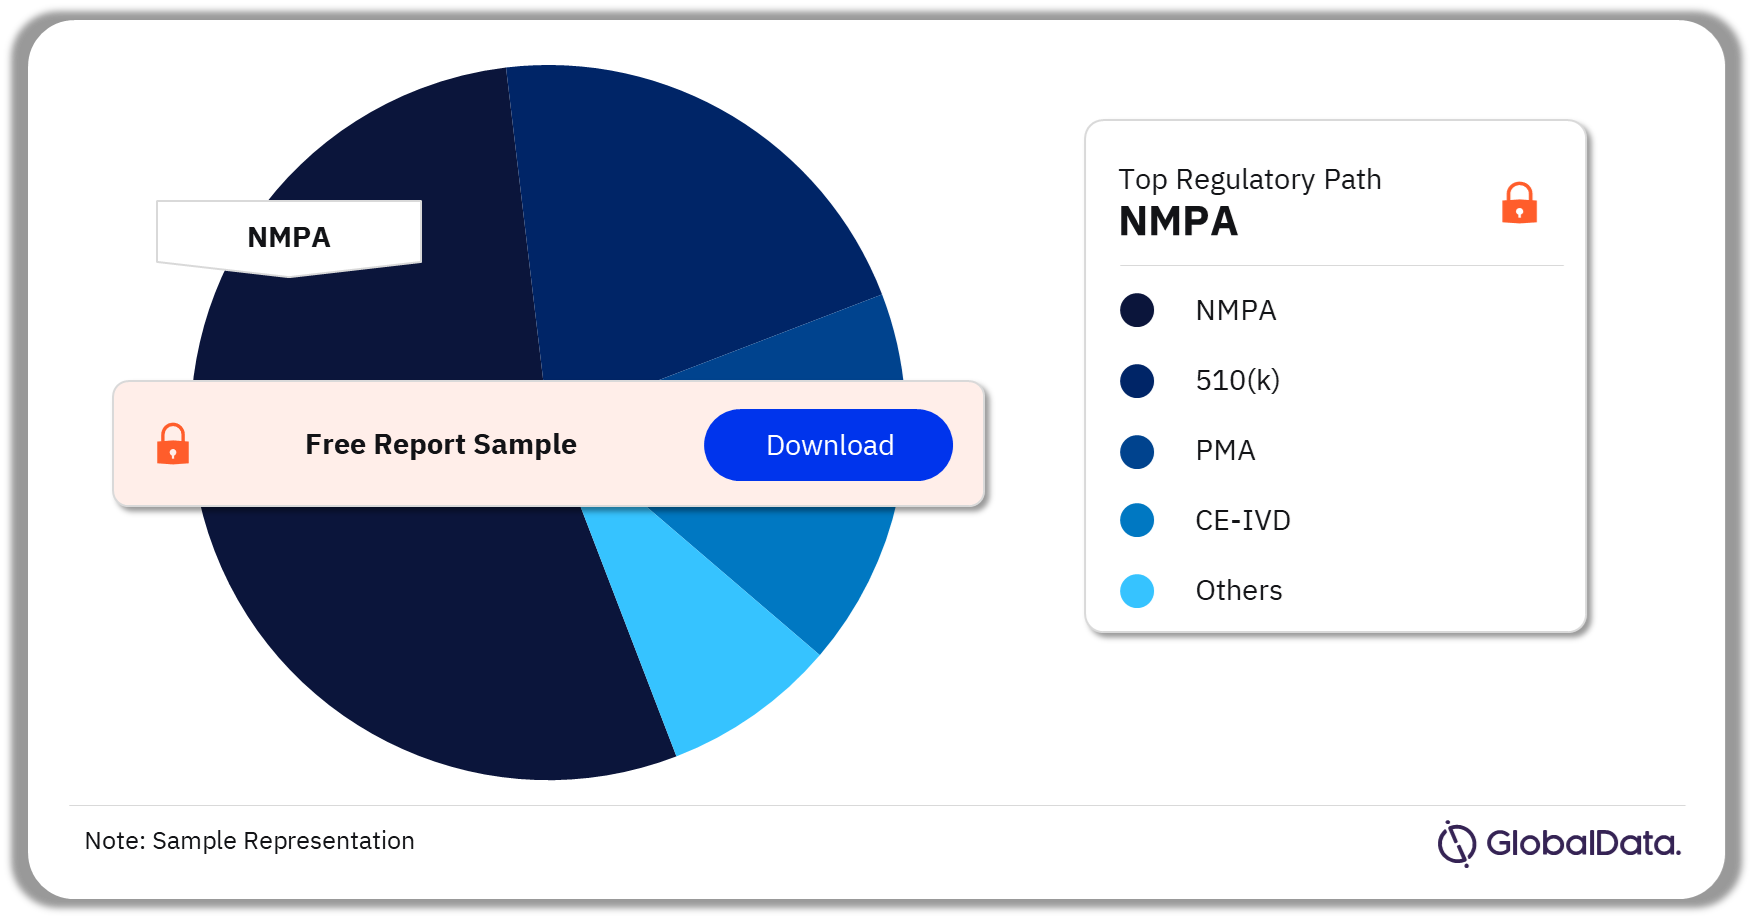 Next Generation Sequencing (NGS) Tests Pipeline Market Analysis by Regulatory Paths, 2023 (%)